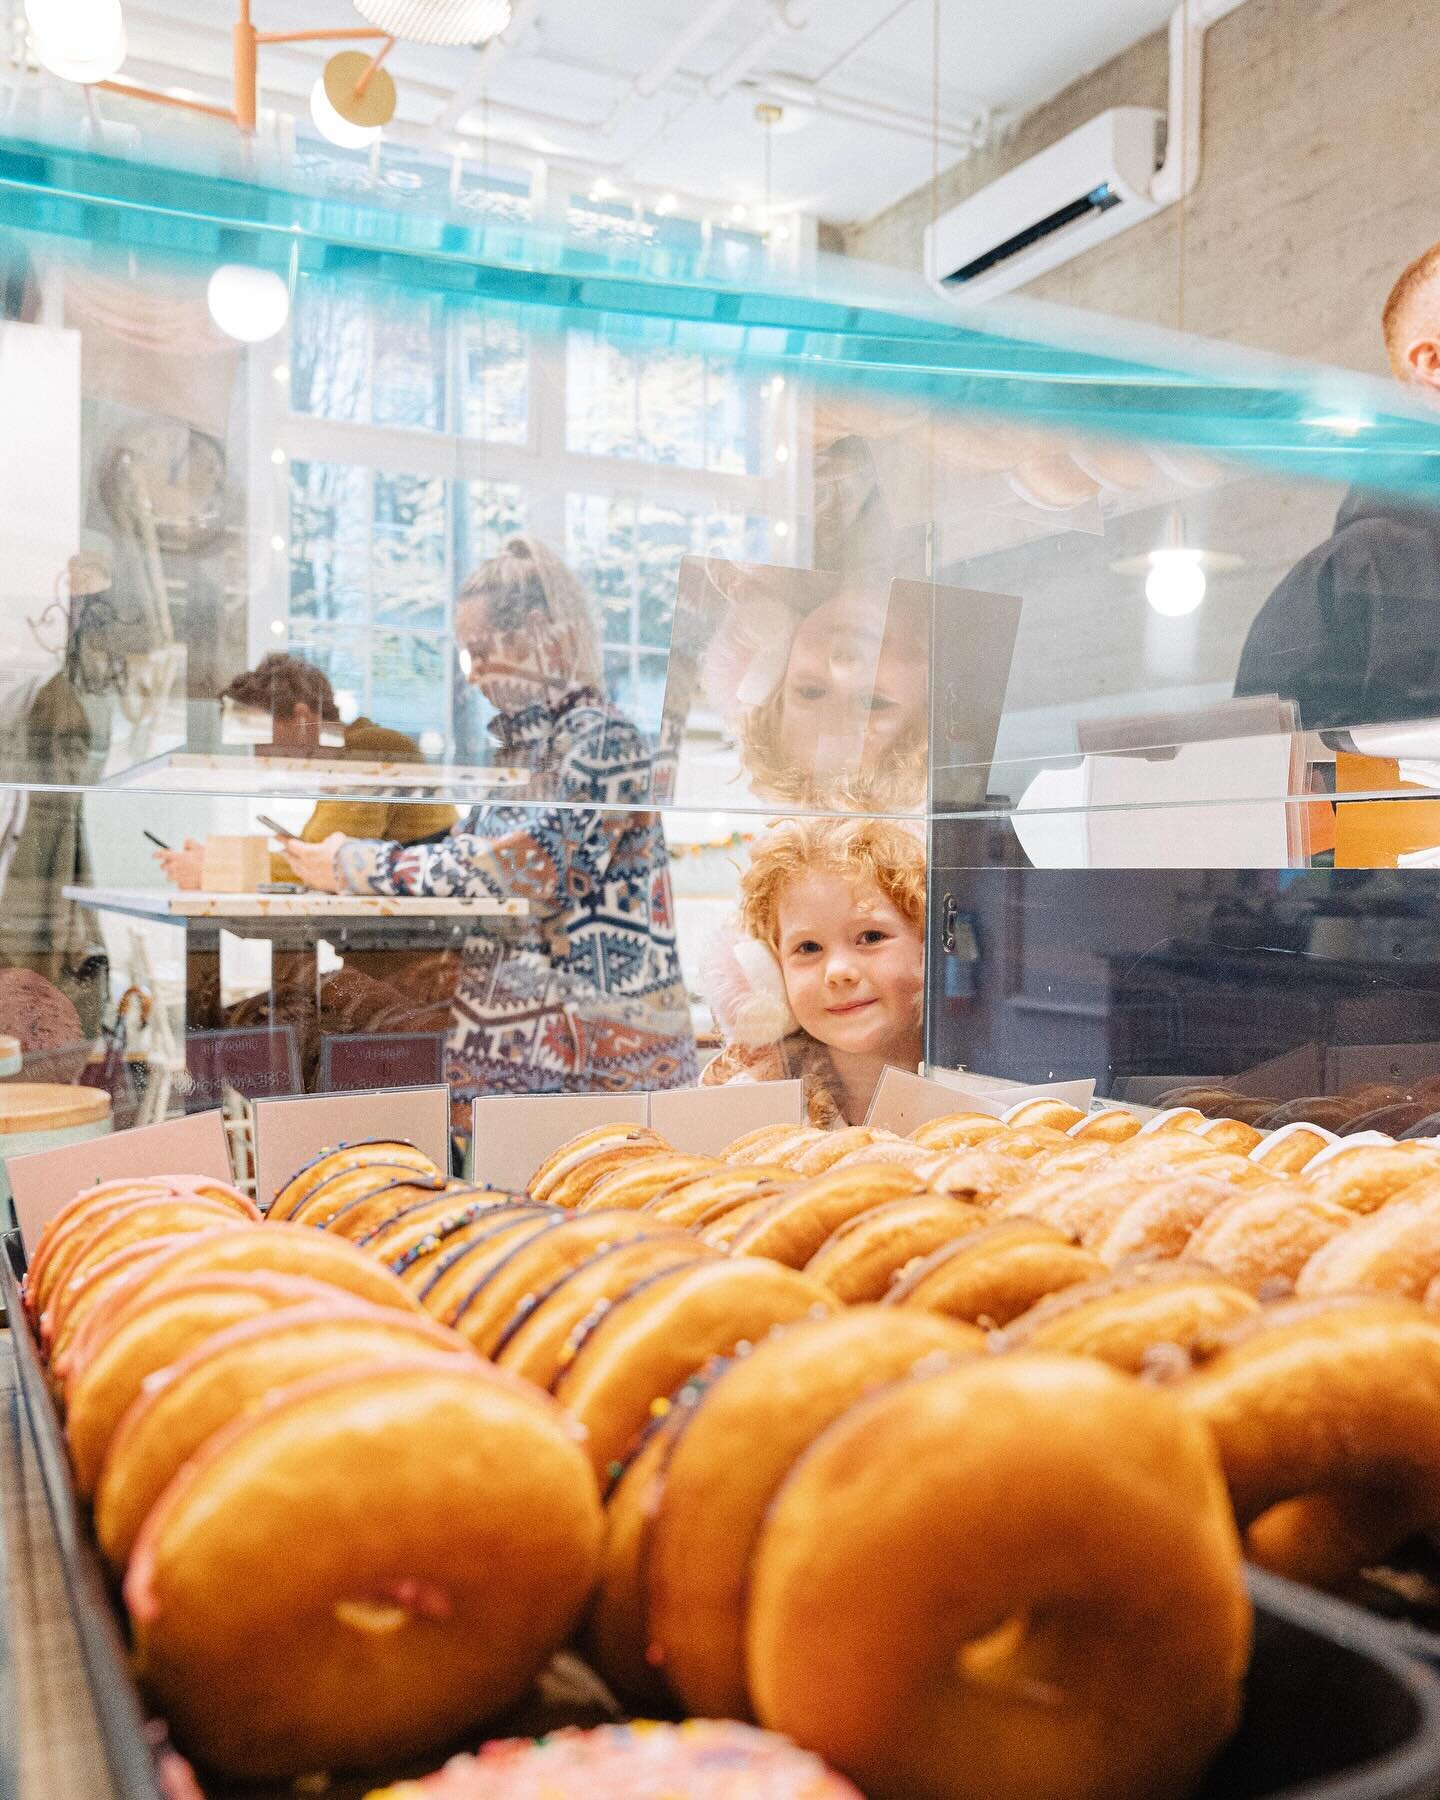 When we were designing the donut display we knew it had to be low enough for our smallest customers to press there face into the glass, and make their pick! 

Charlotte showing us how it&rsquo;s done! 

#donuts #freshdonuts #handmadedonuts #creampony